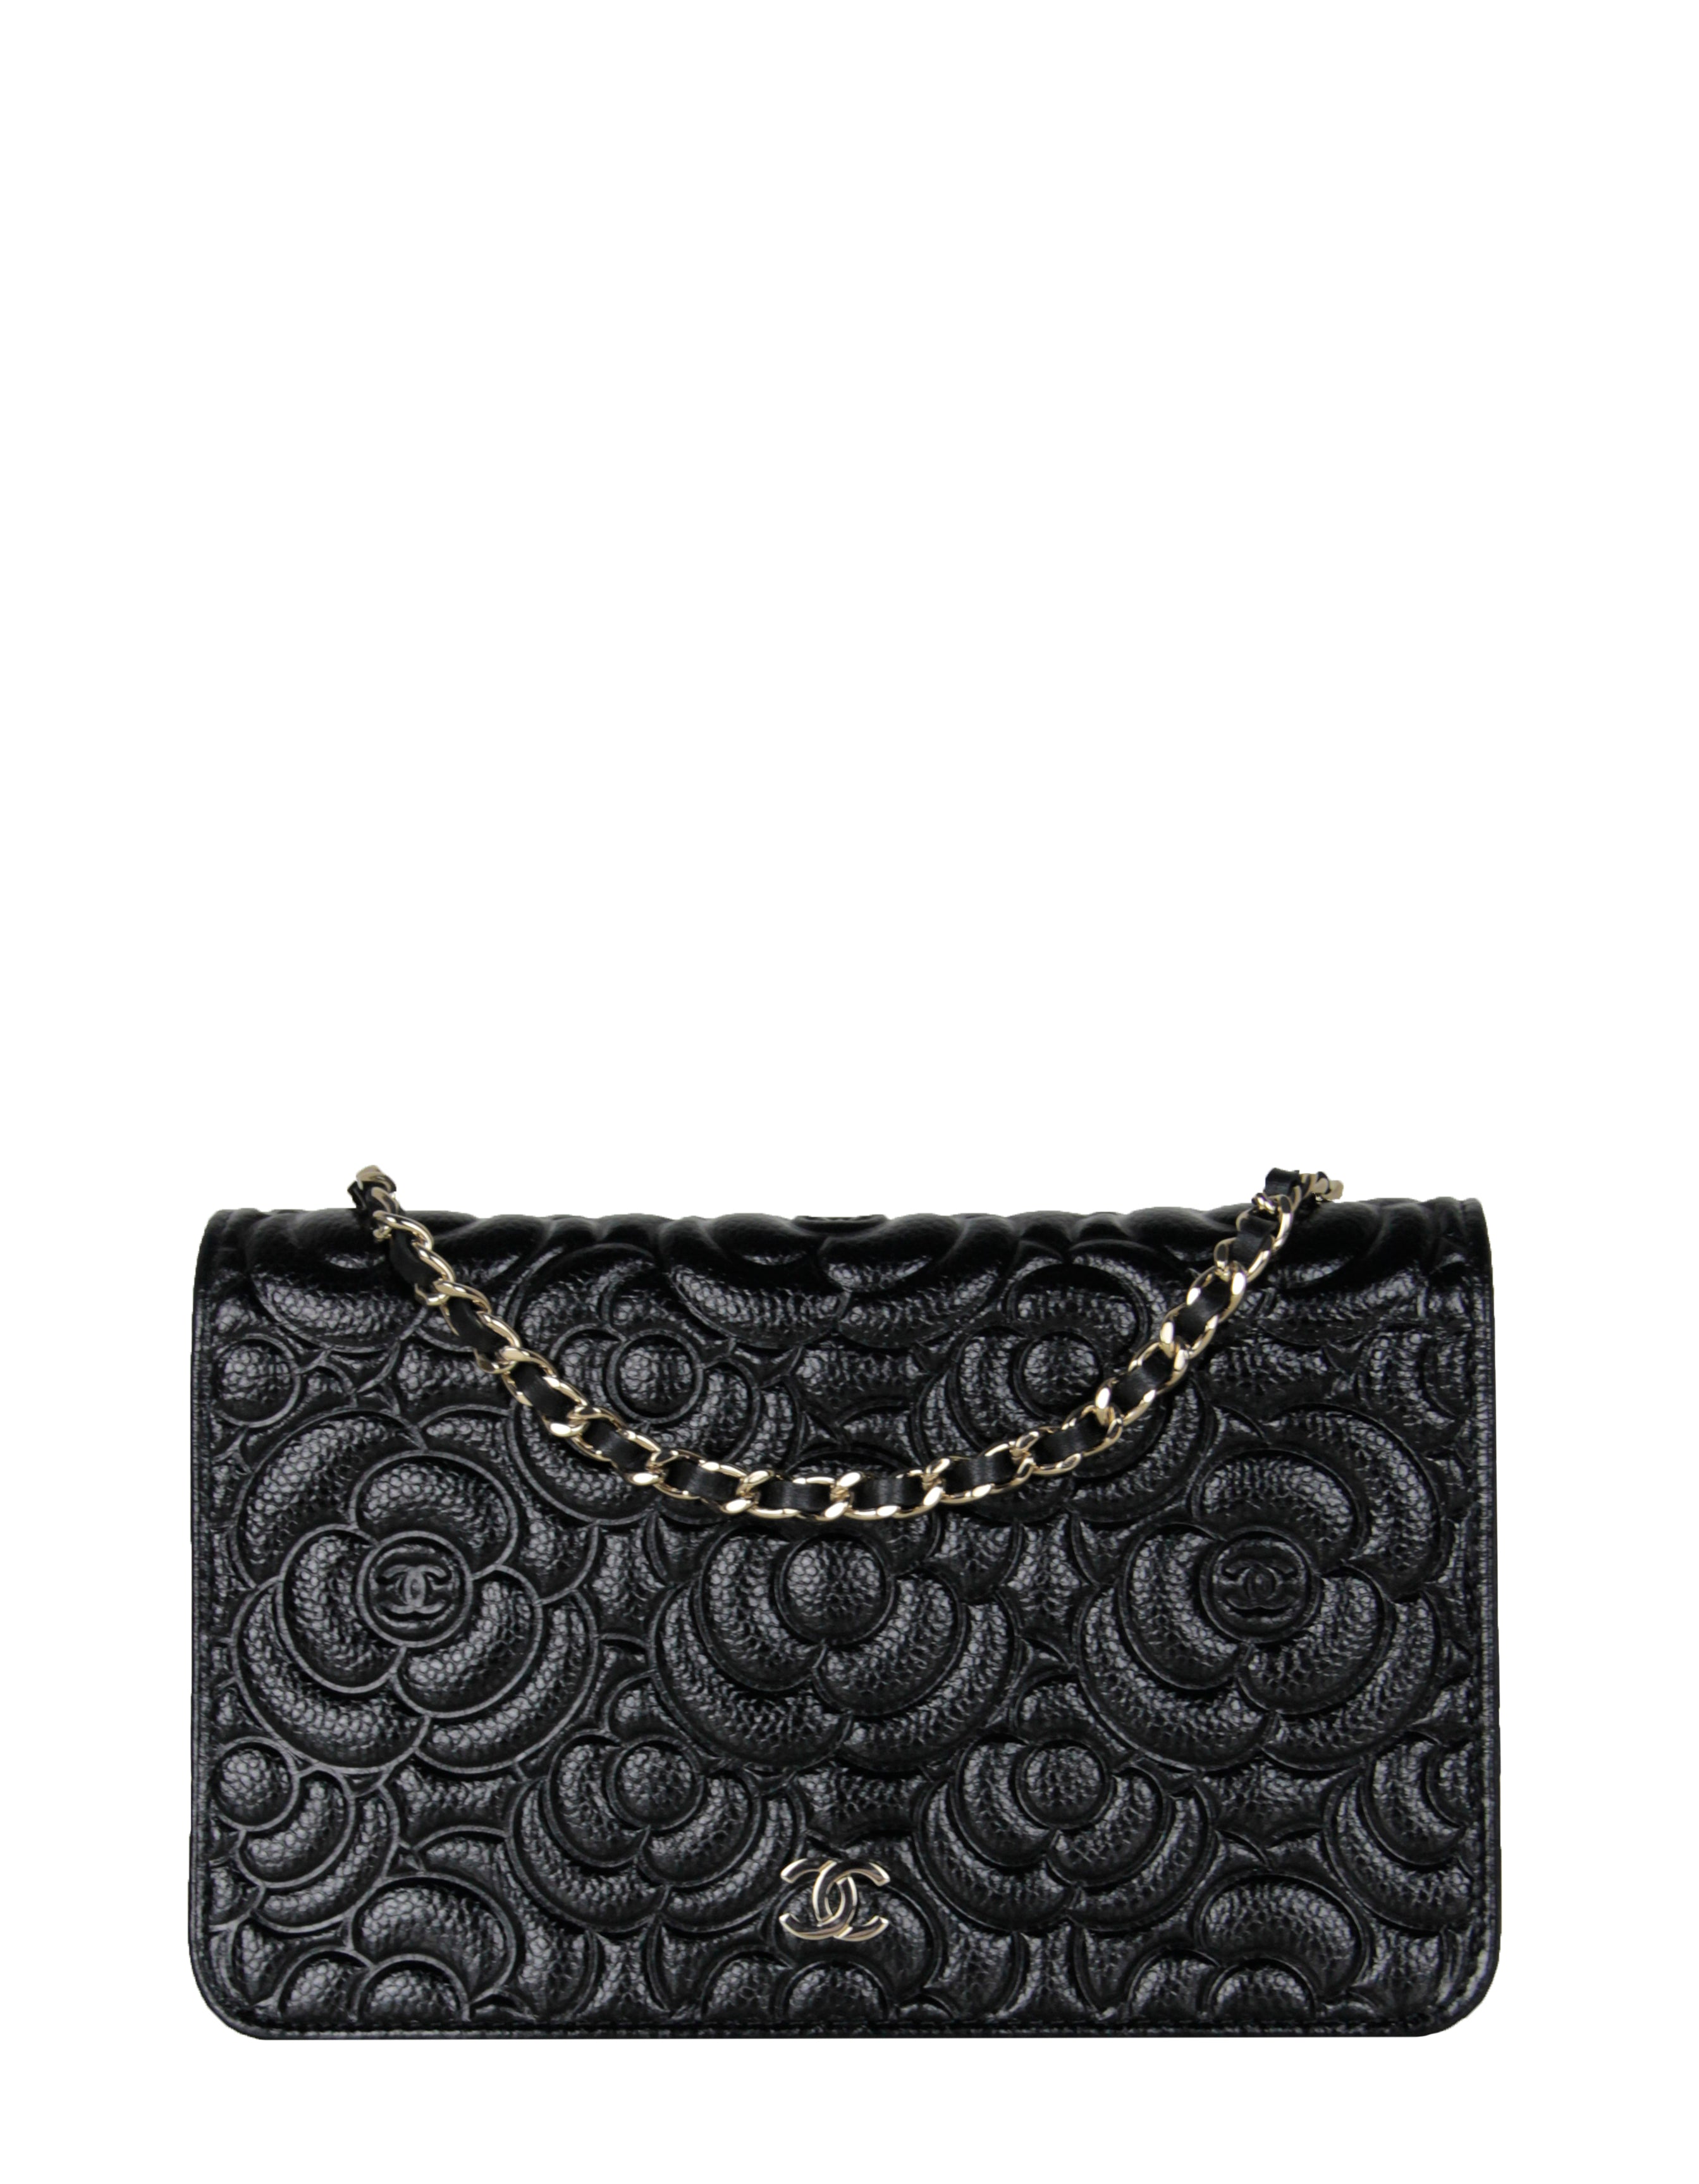 CHANEL 1980's Coco Mademoiselle Coin Black Camellia Flower